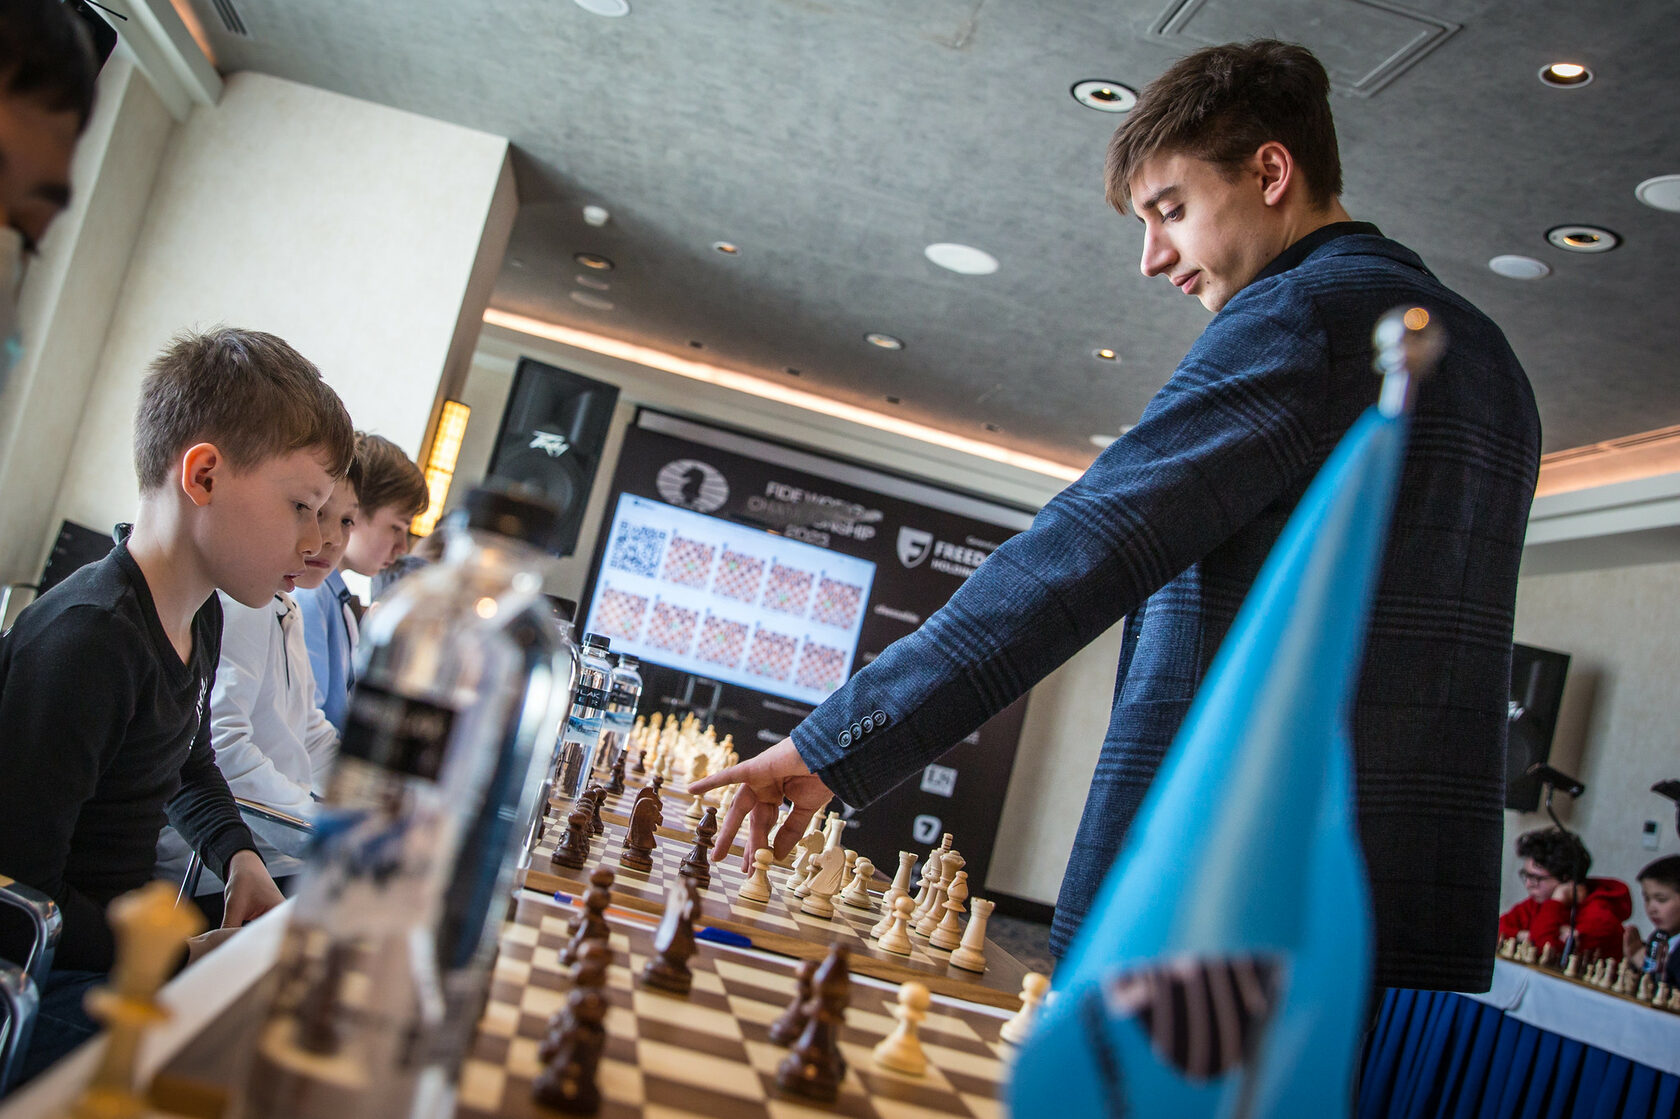 FIDE - International Chess Federation - Happy Birthday to GM Daniil Dubov  who turns 25 today! 🎊 He is not only a creative chess player but also a  skilled and entertaining commentator.